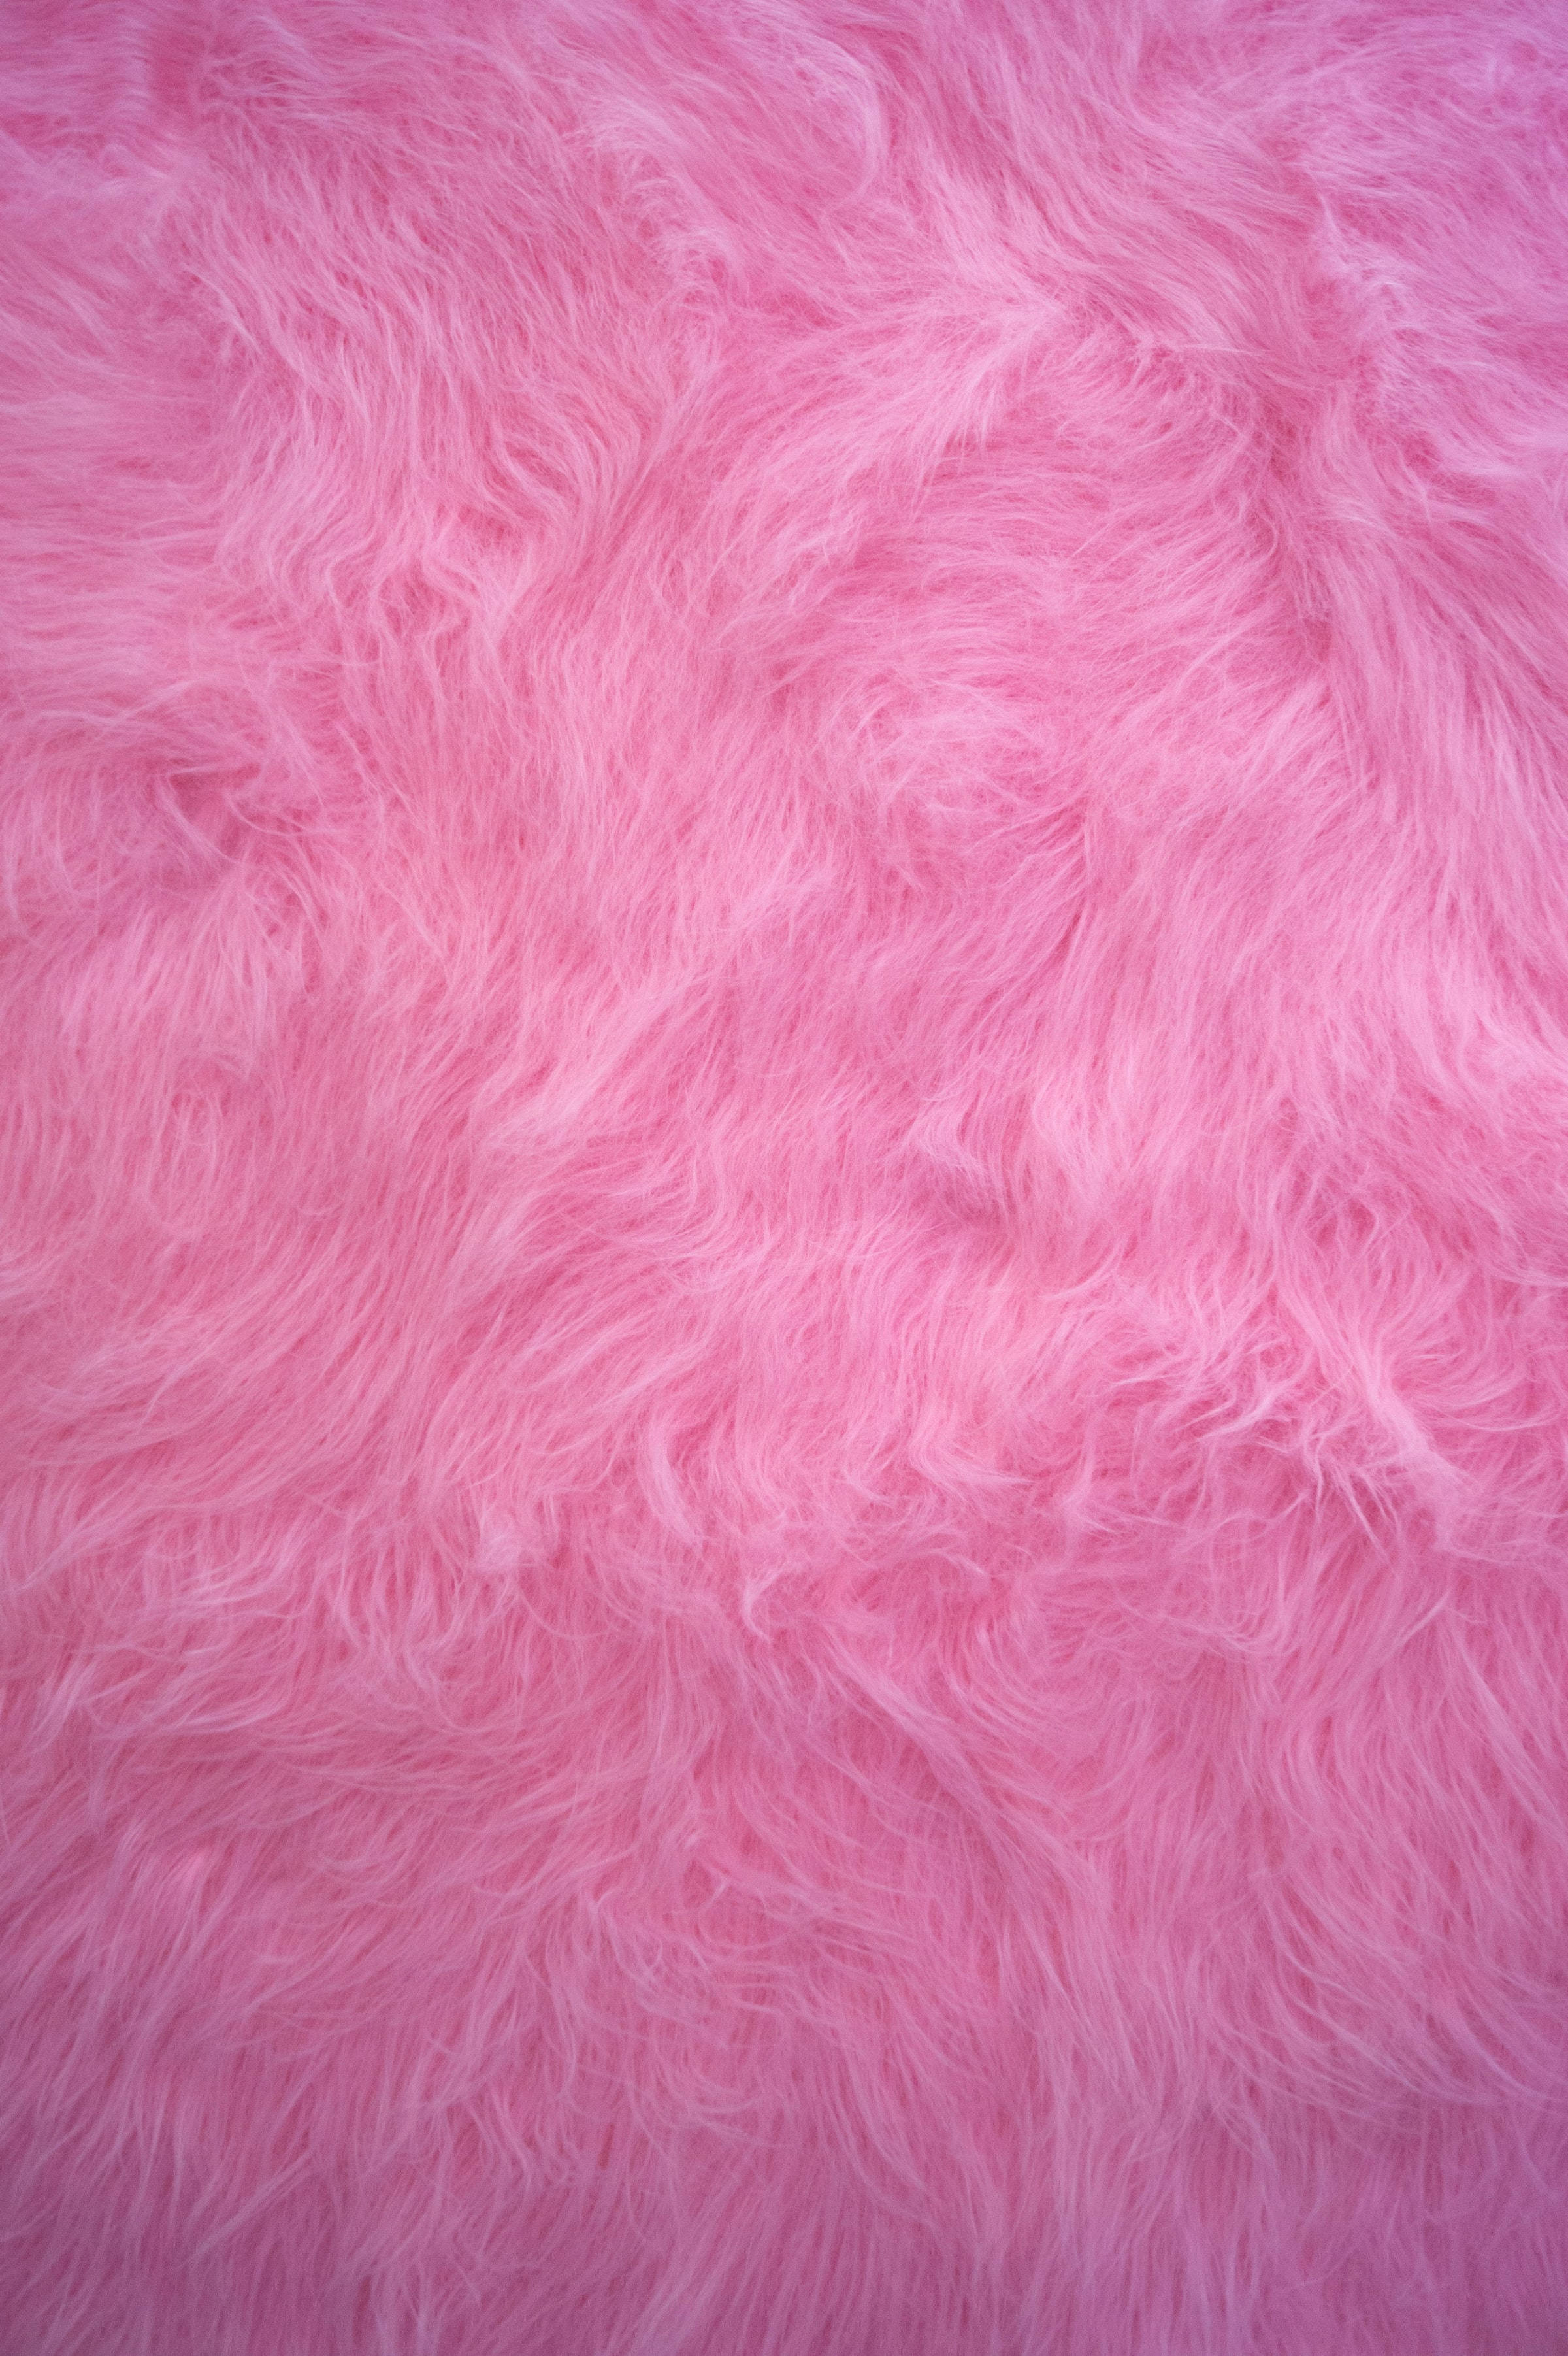 Cute Pink Aesthetic Faux Fabric Background